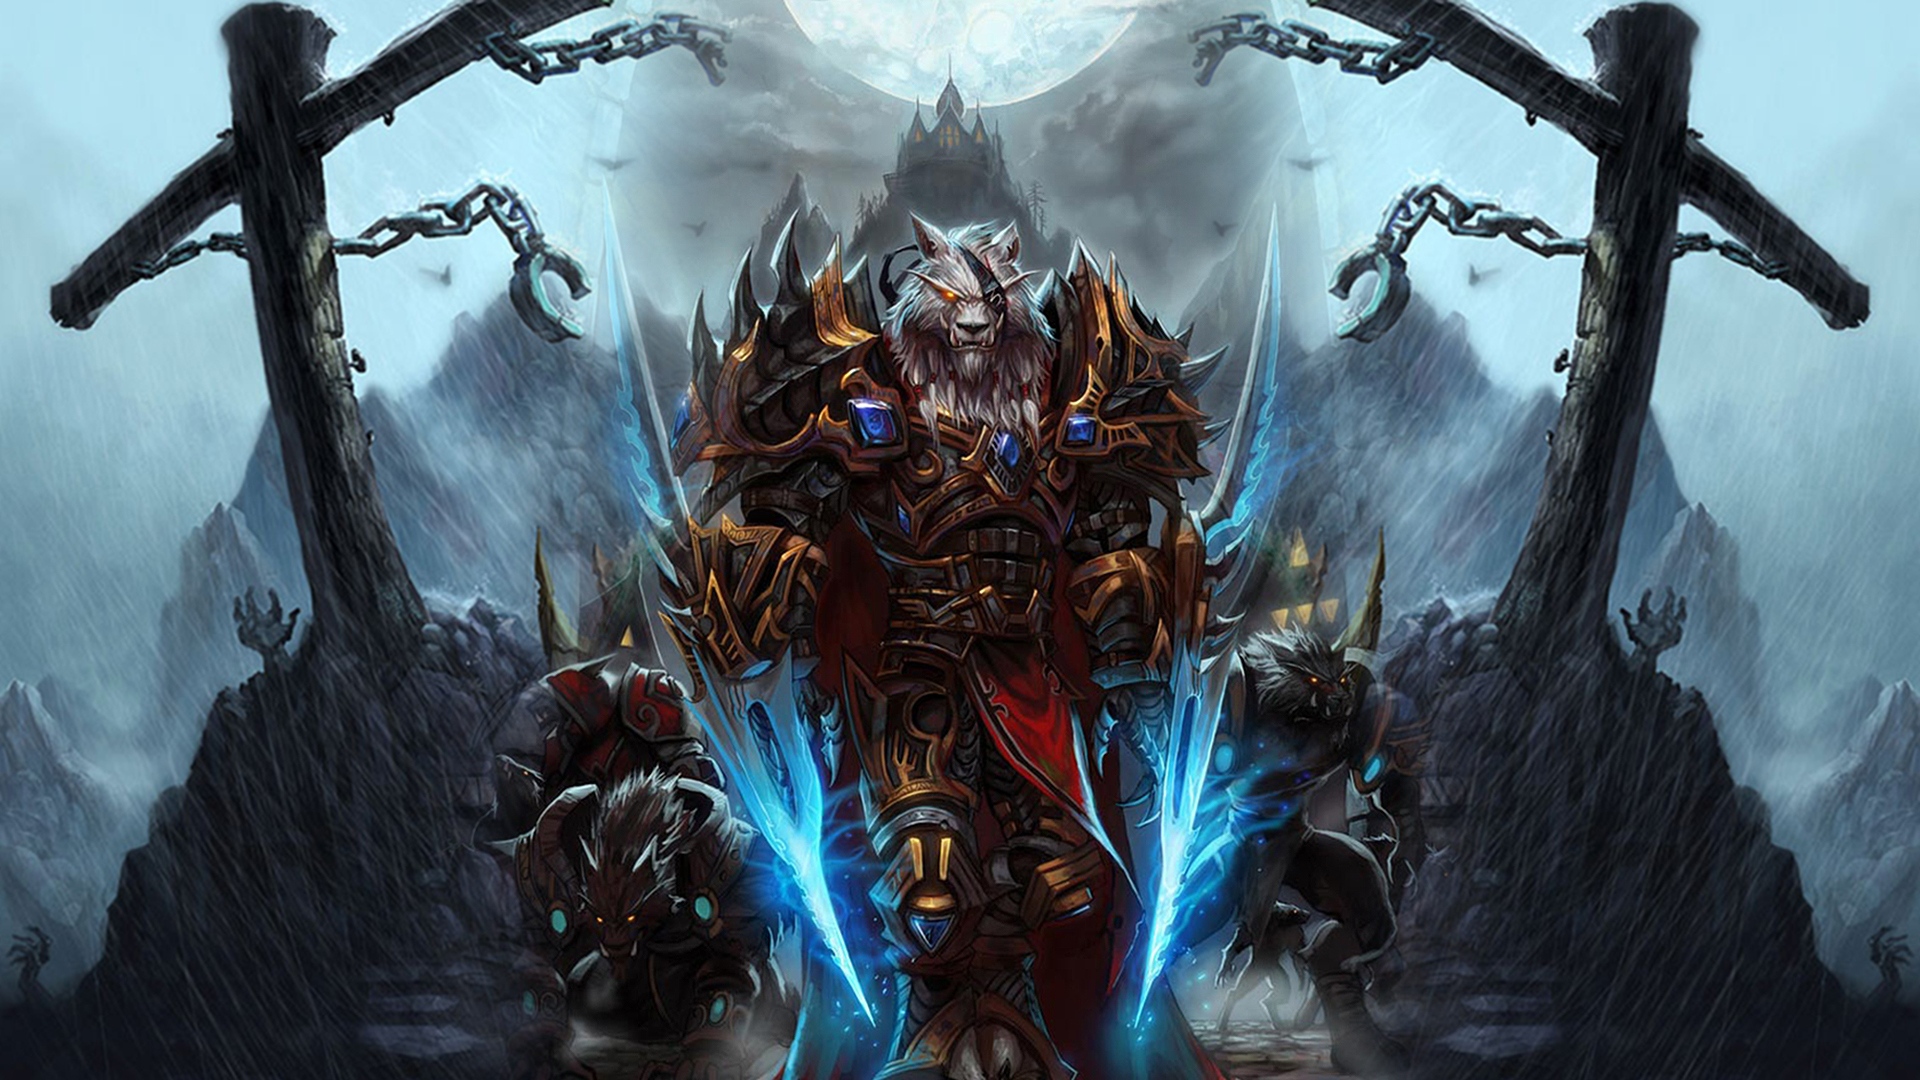 Download Wallpaper 1920x1080 World of warcraft Worgen Character Arm